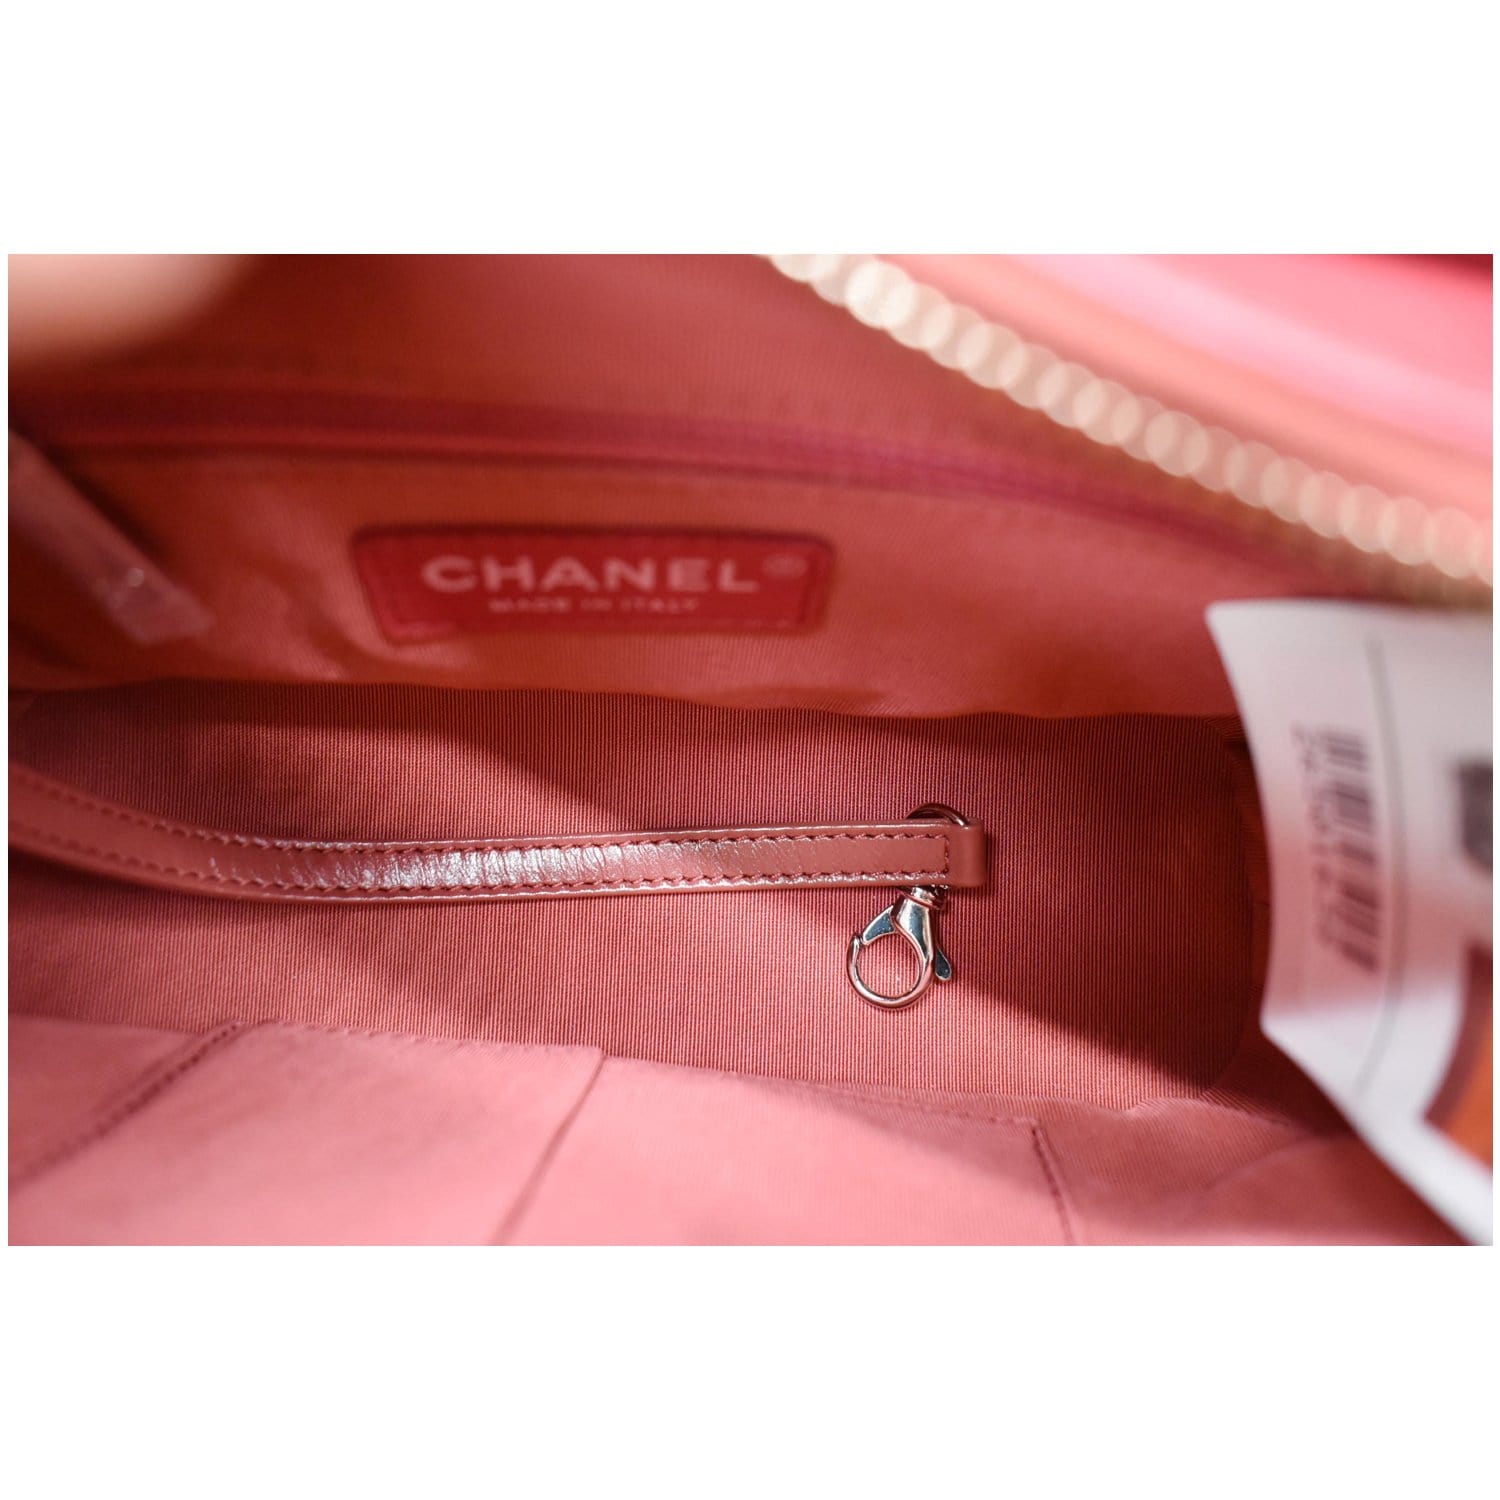 Chanel Pink Leather Gabrielle Small Hobo Bag Chanel